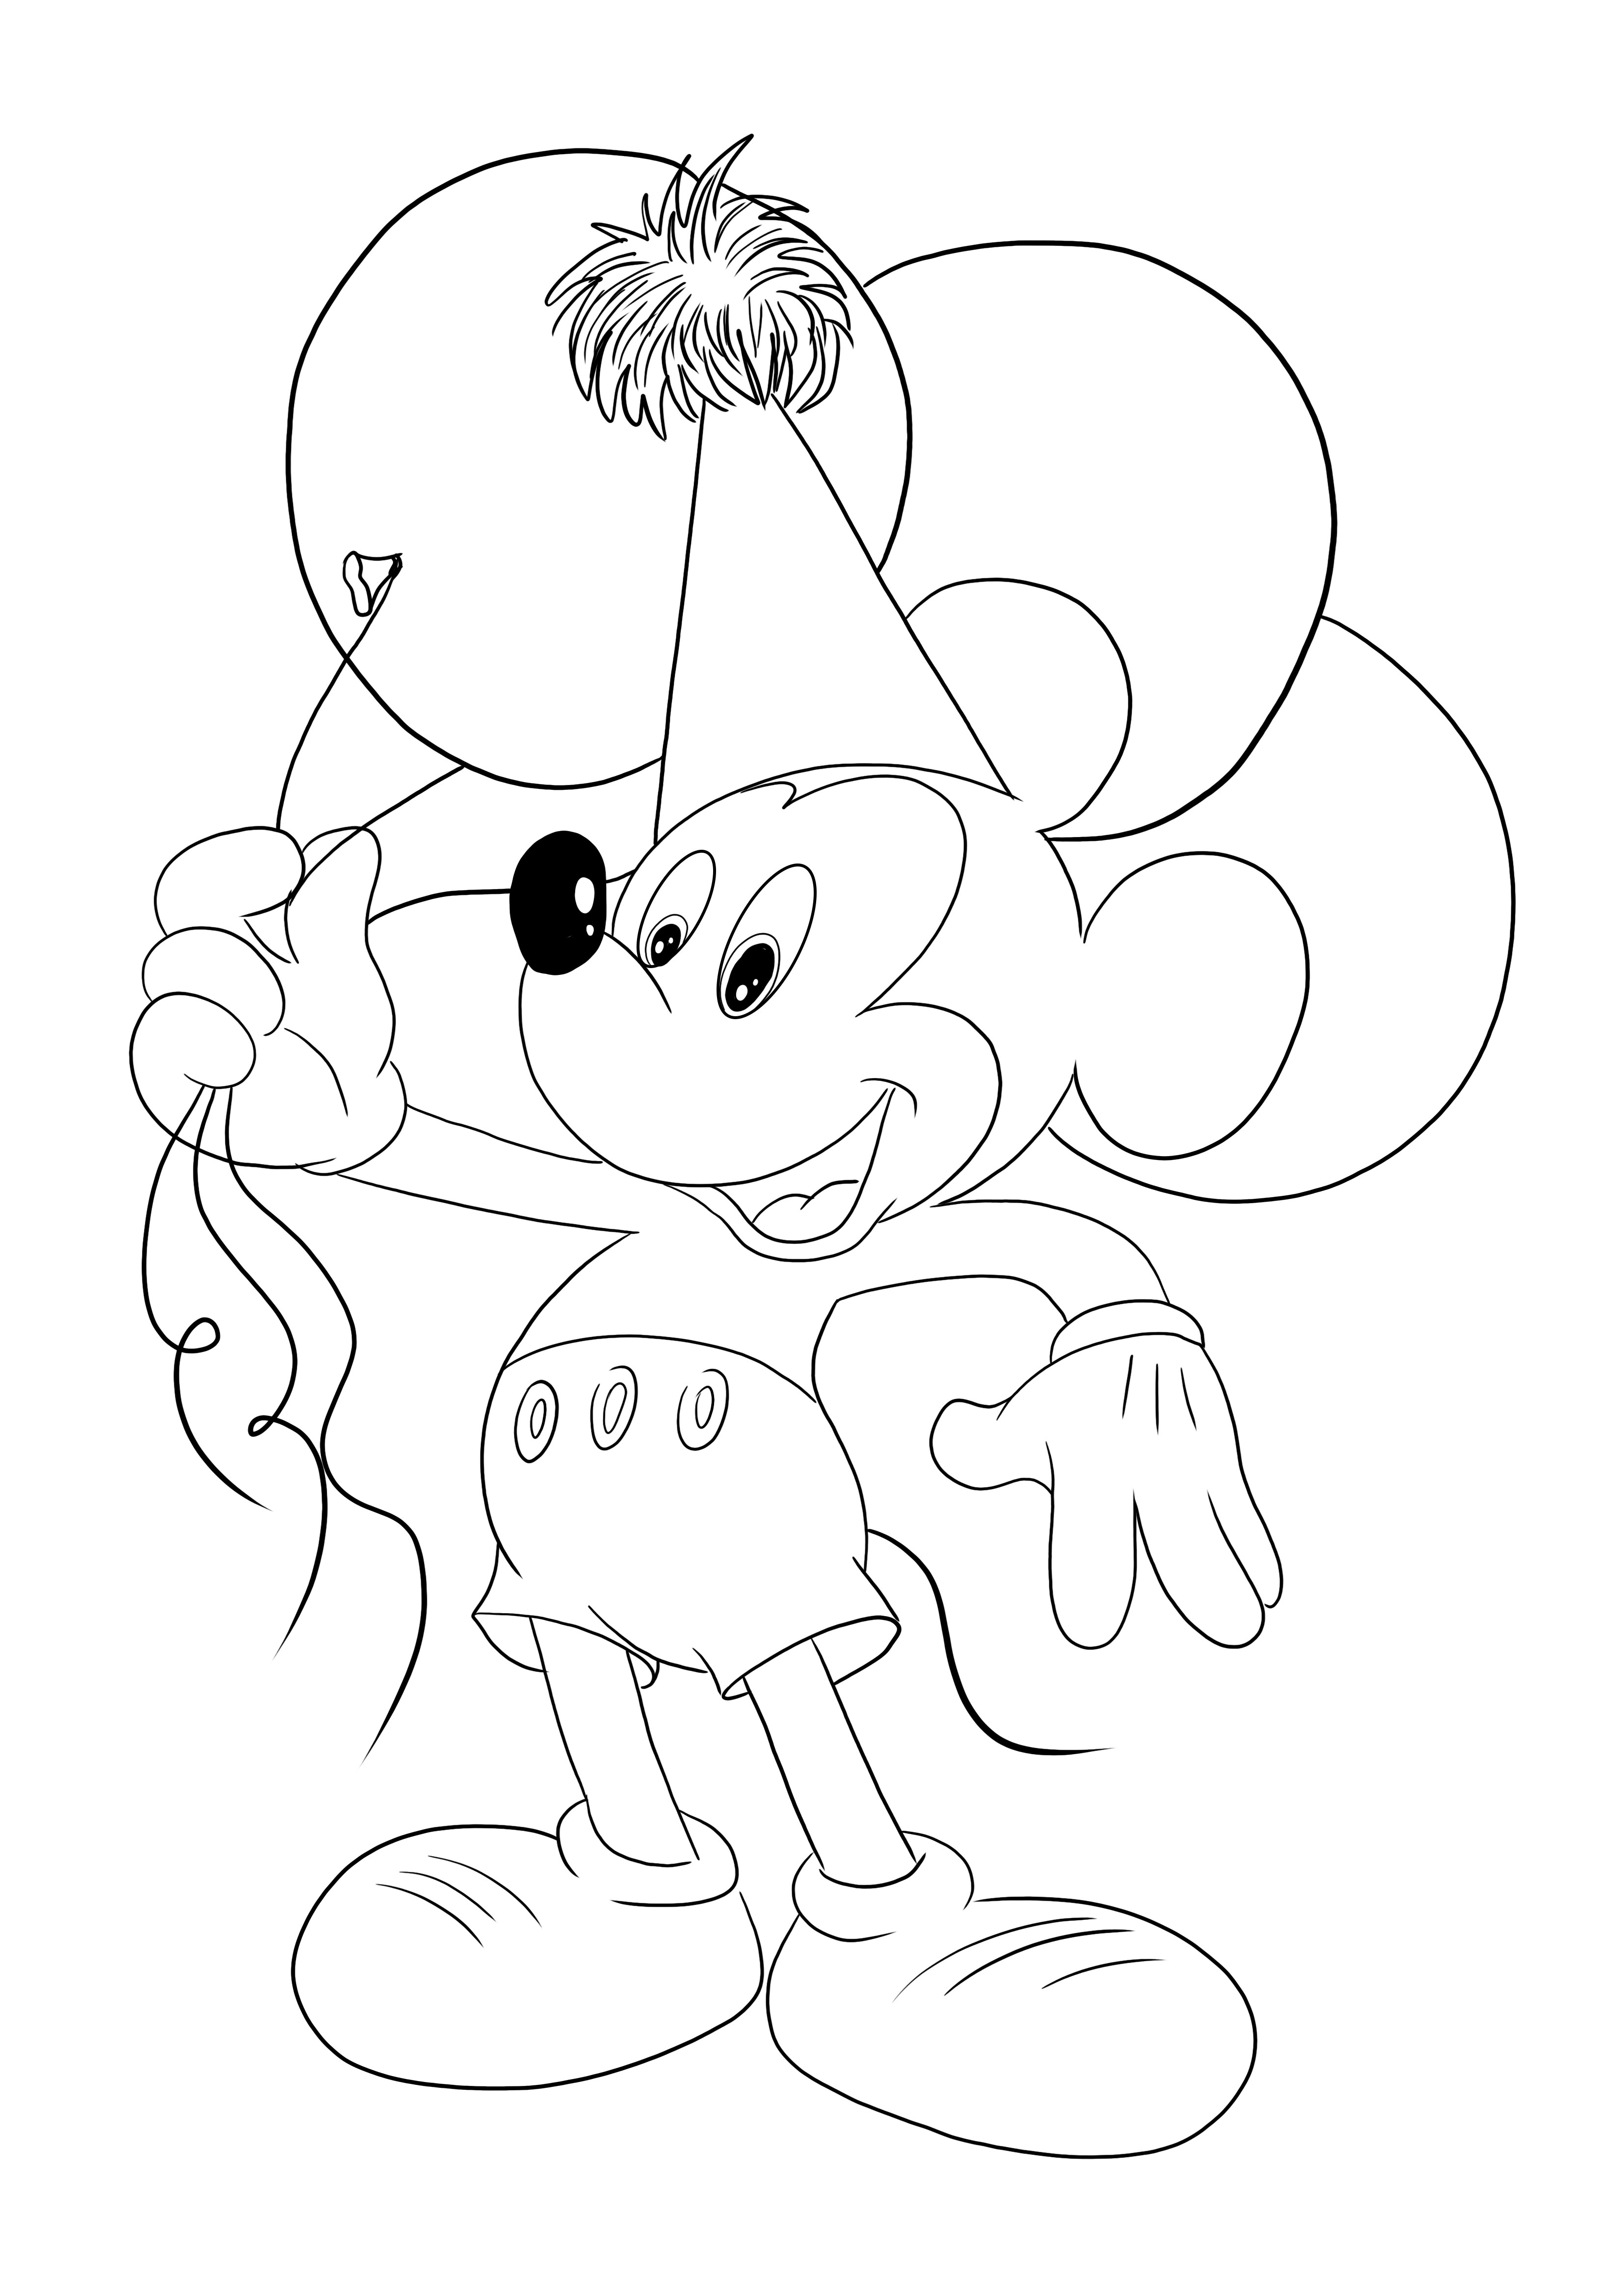 Mickey Mouse with Balloons free printable to color easily by kids